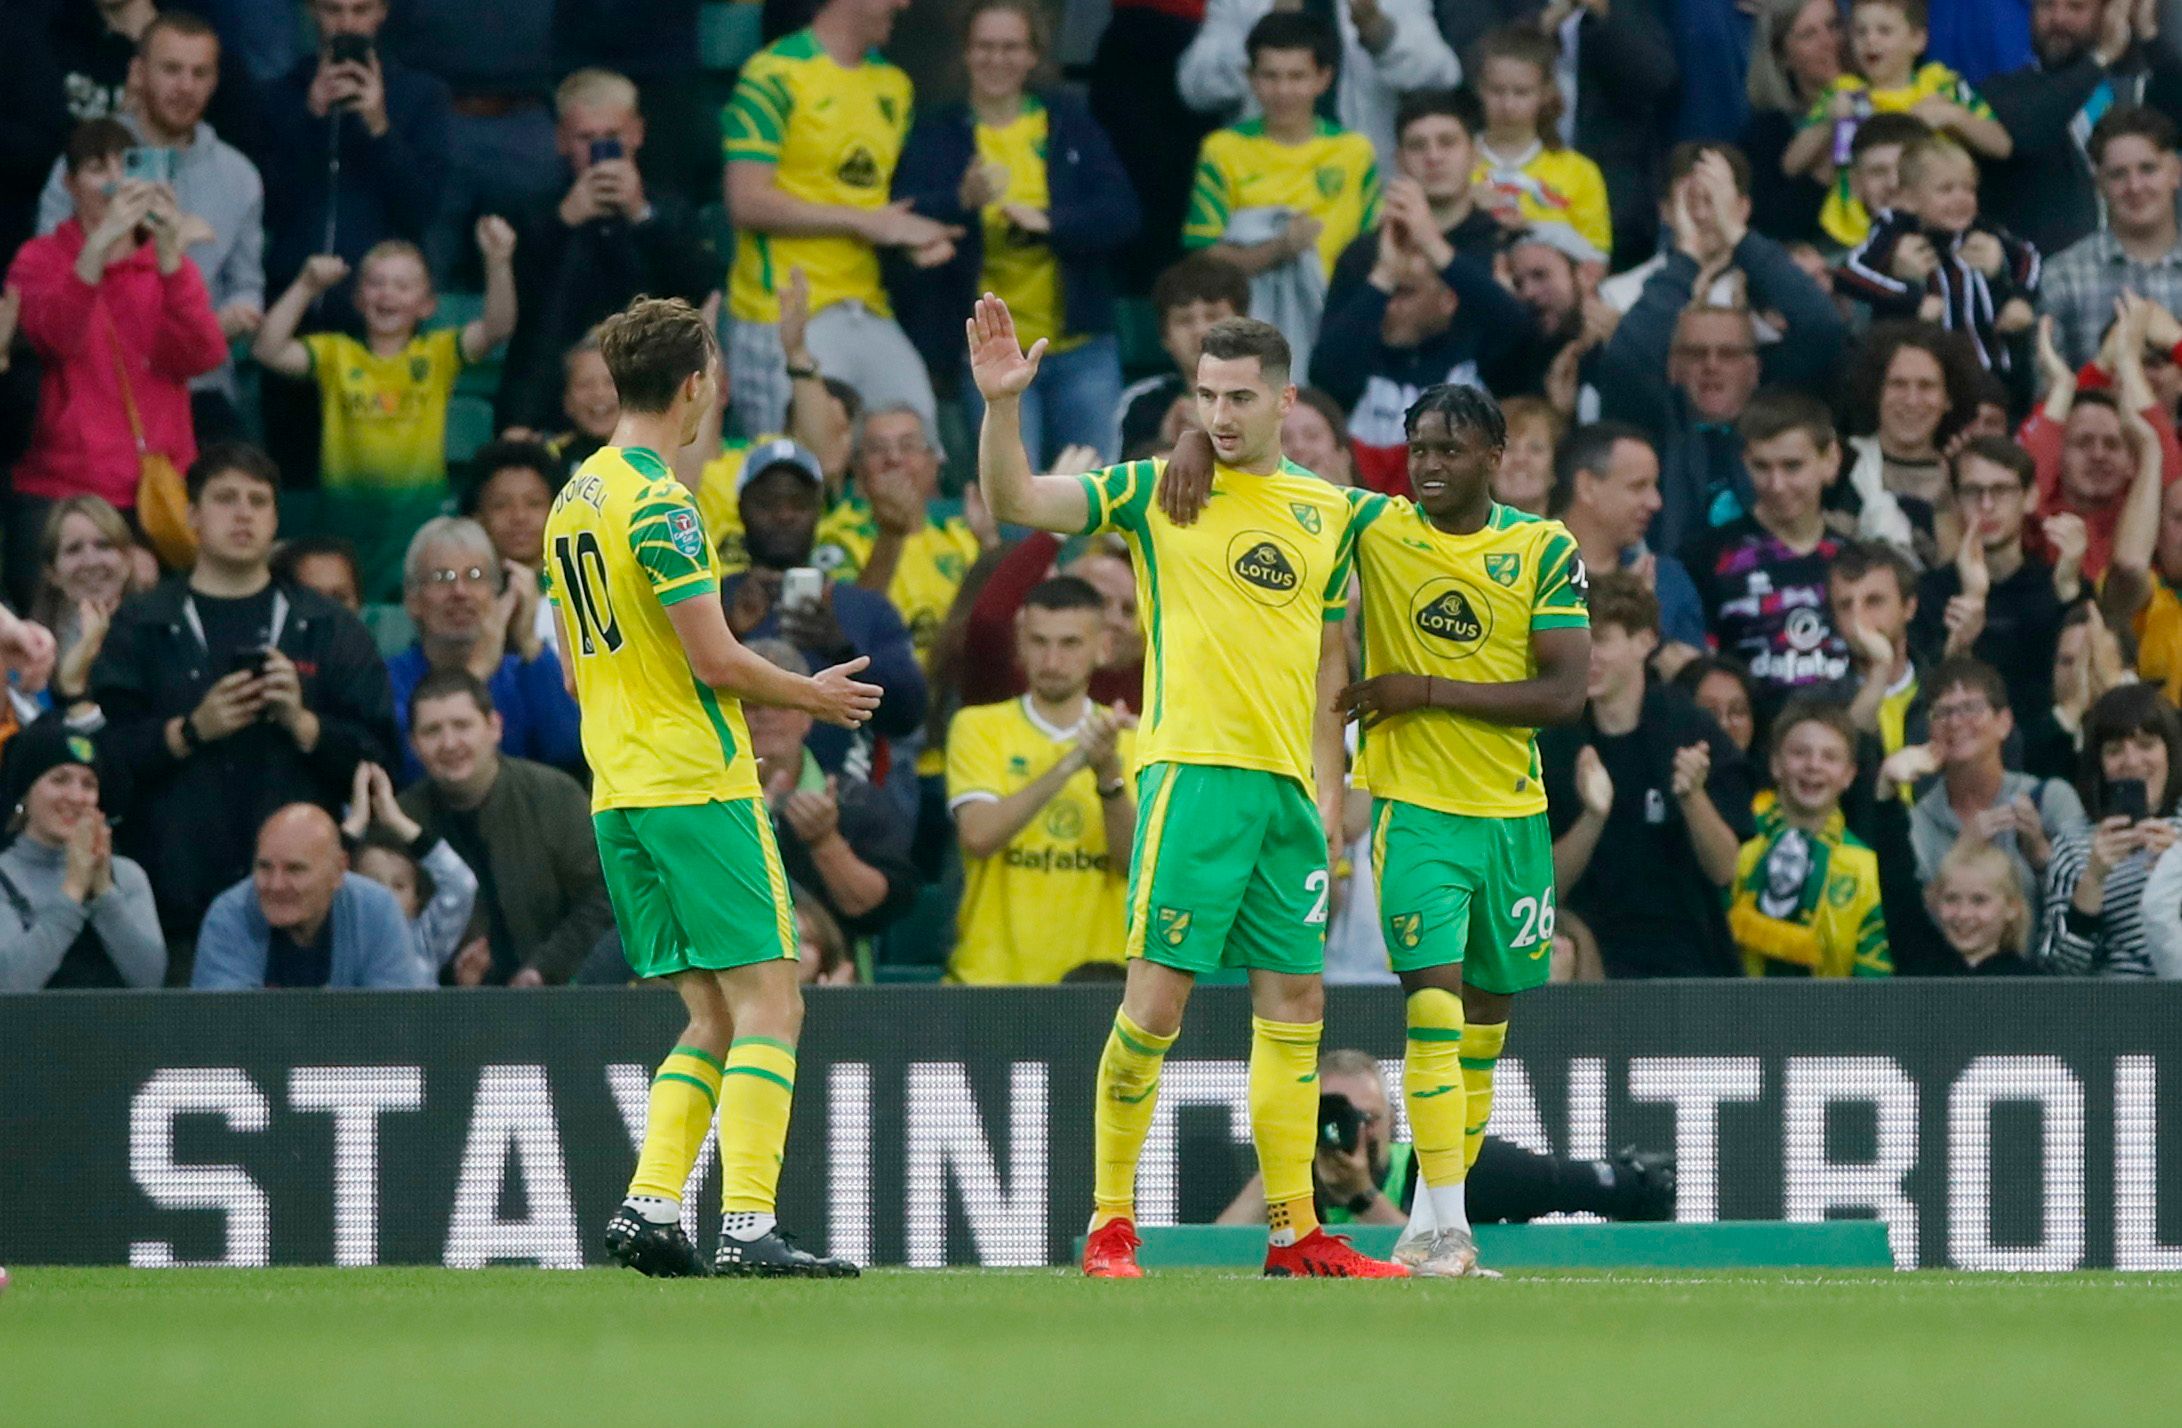 Soccer - England - Carabao Cup Second Round - Norwich City v AFC Bournemouth - Carrow Road, Norwich, Britain - August 24, 2021 Norwich City's Kenny McLean celebrates scoring their second goal with  Bali Mumba and  Kieran Dowell Action Images via Reuters/Matthew Childs